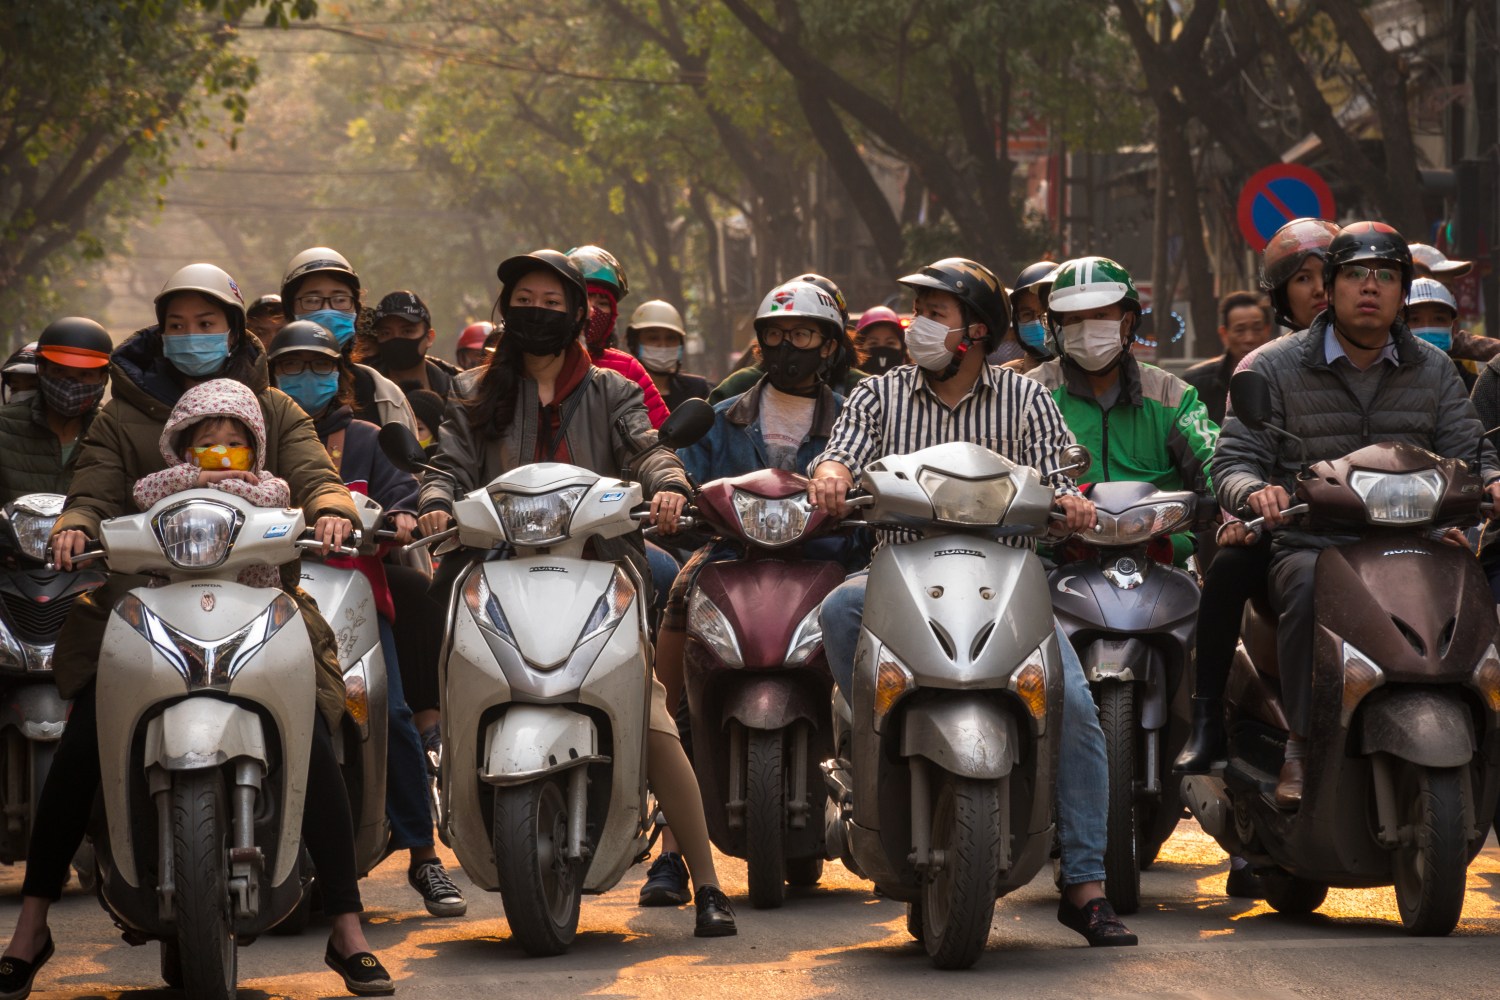 Vietnamese people wearing COVID-19 masks while riding scooters.